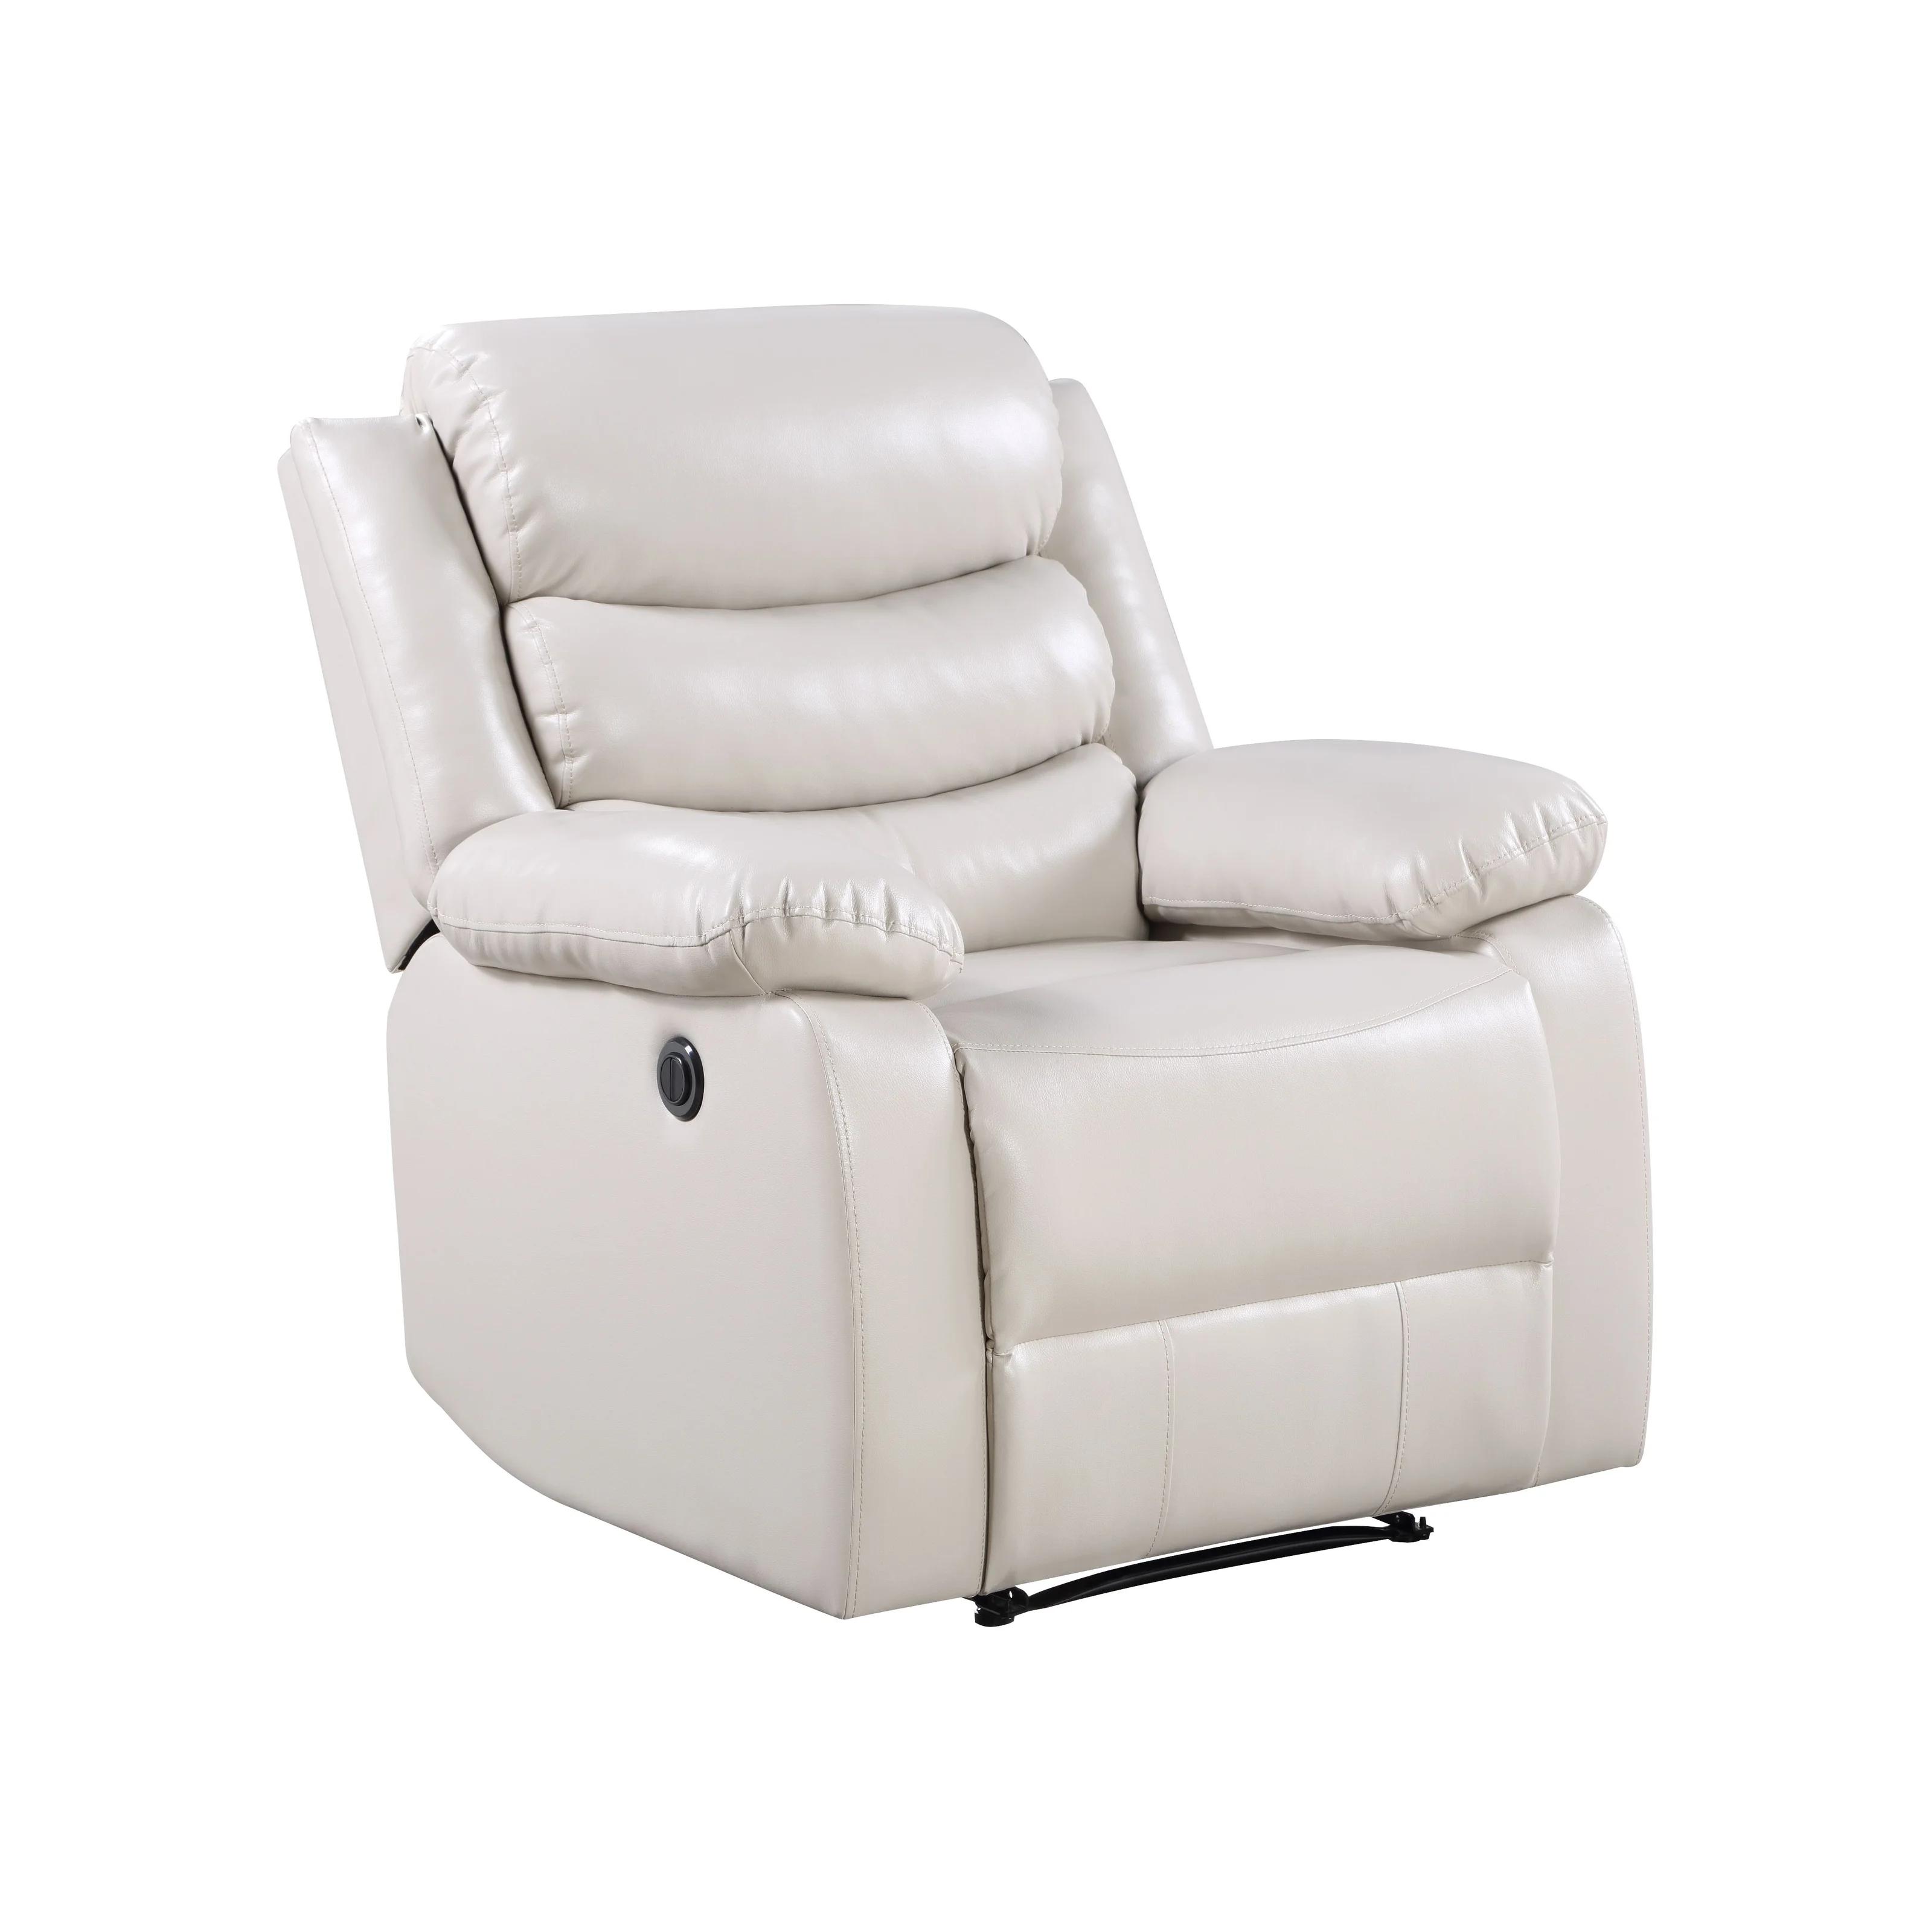 

    
Contemporary White Faux Leather PU Recliner by Acme Eilbra 56911
